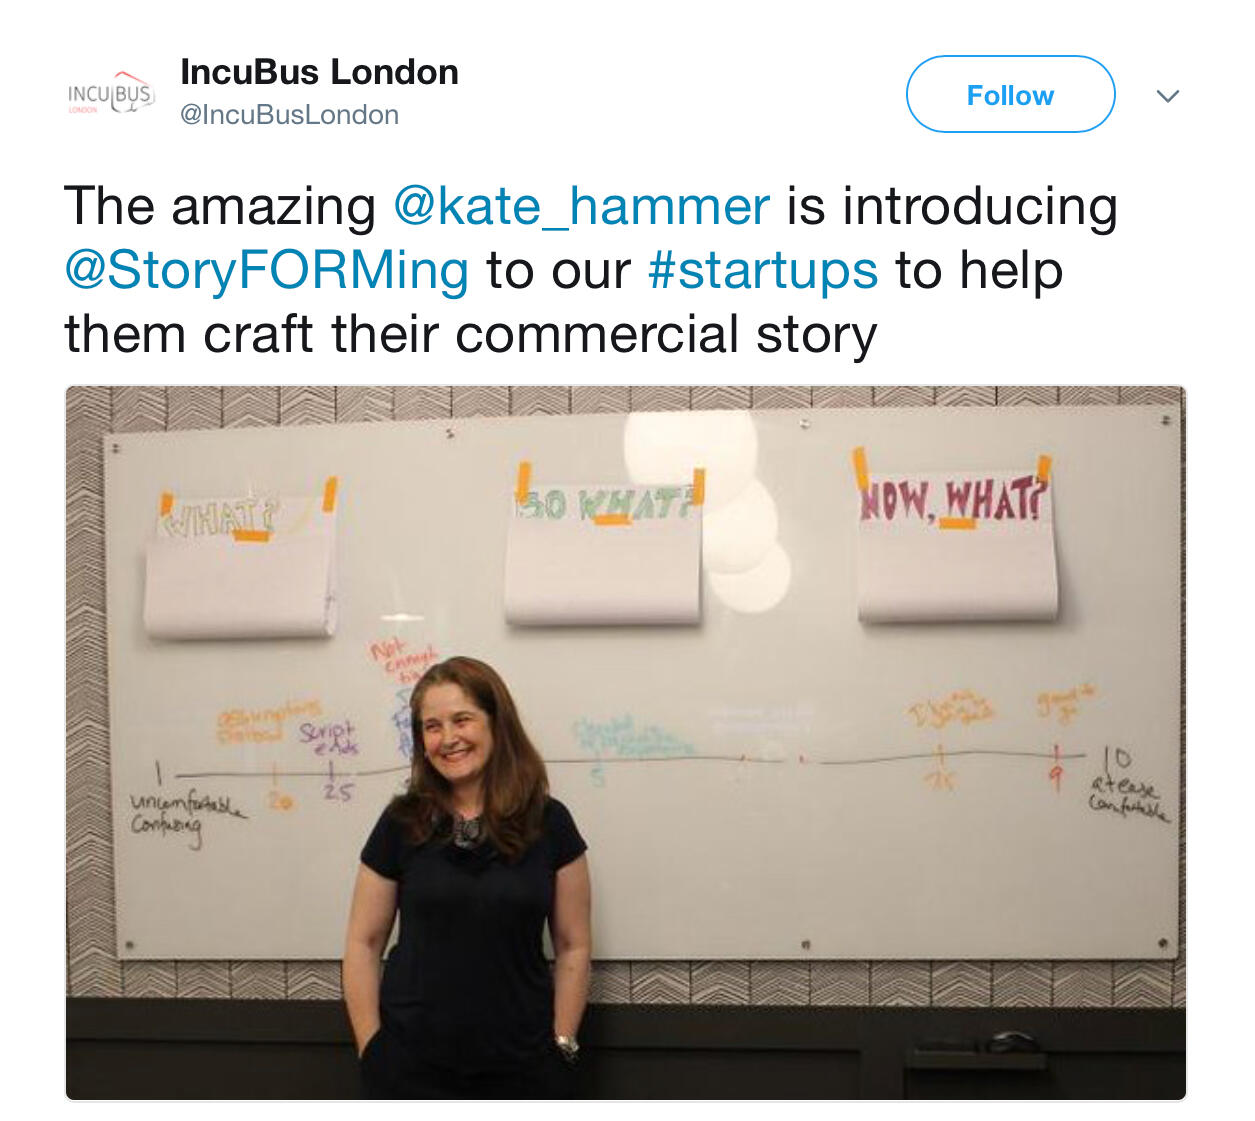 Tweet screenshot from Incubus London that says: The amazing Kate Hammer is introducing storyFORMing to our startups to help them craft their commercial story with a whiteboard in front of which a white-middle aged woman wearing navy blue smiles.